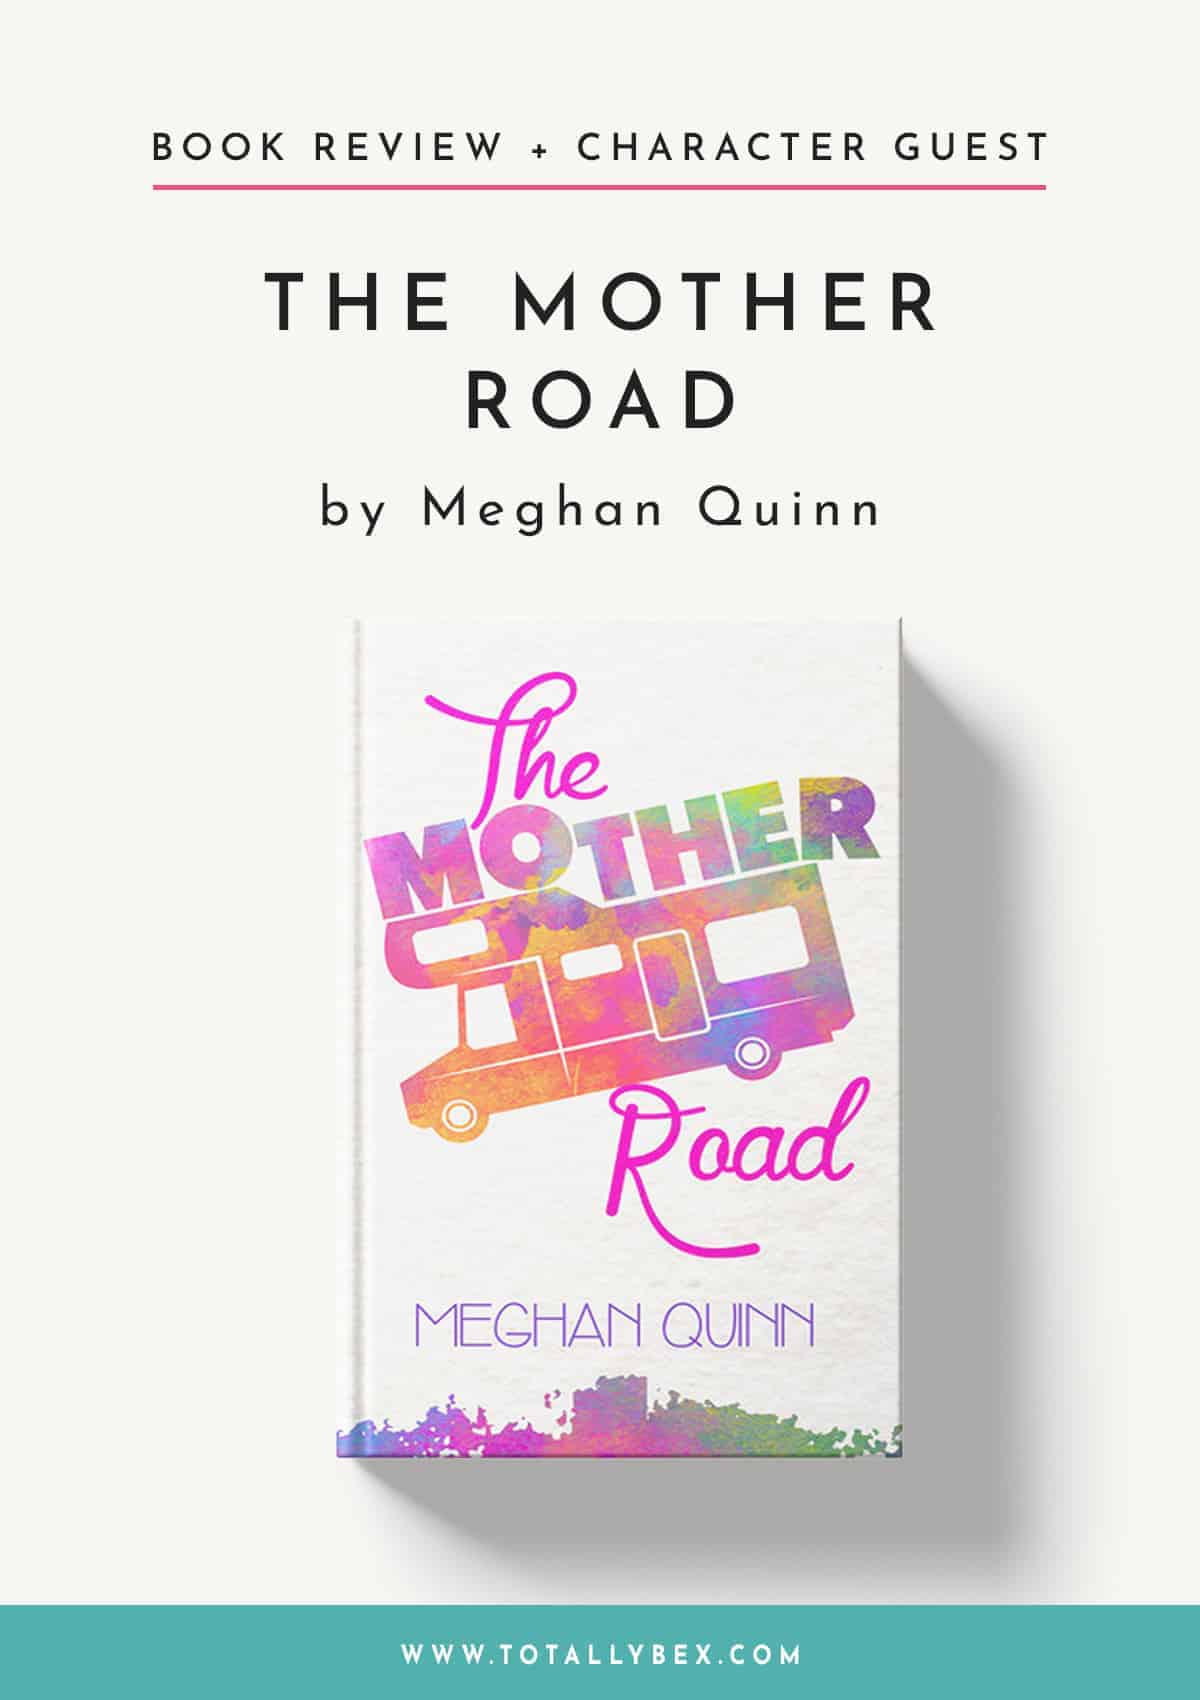 The Mother Road by Meghan Quinn – Review and Beauty Tips from Marley!